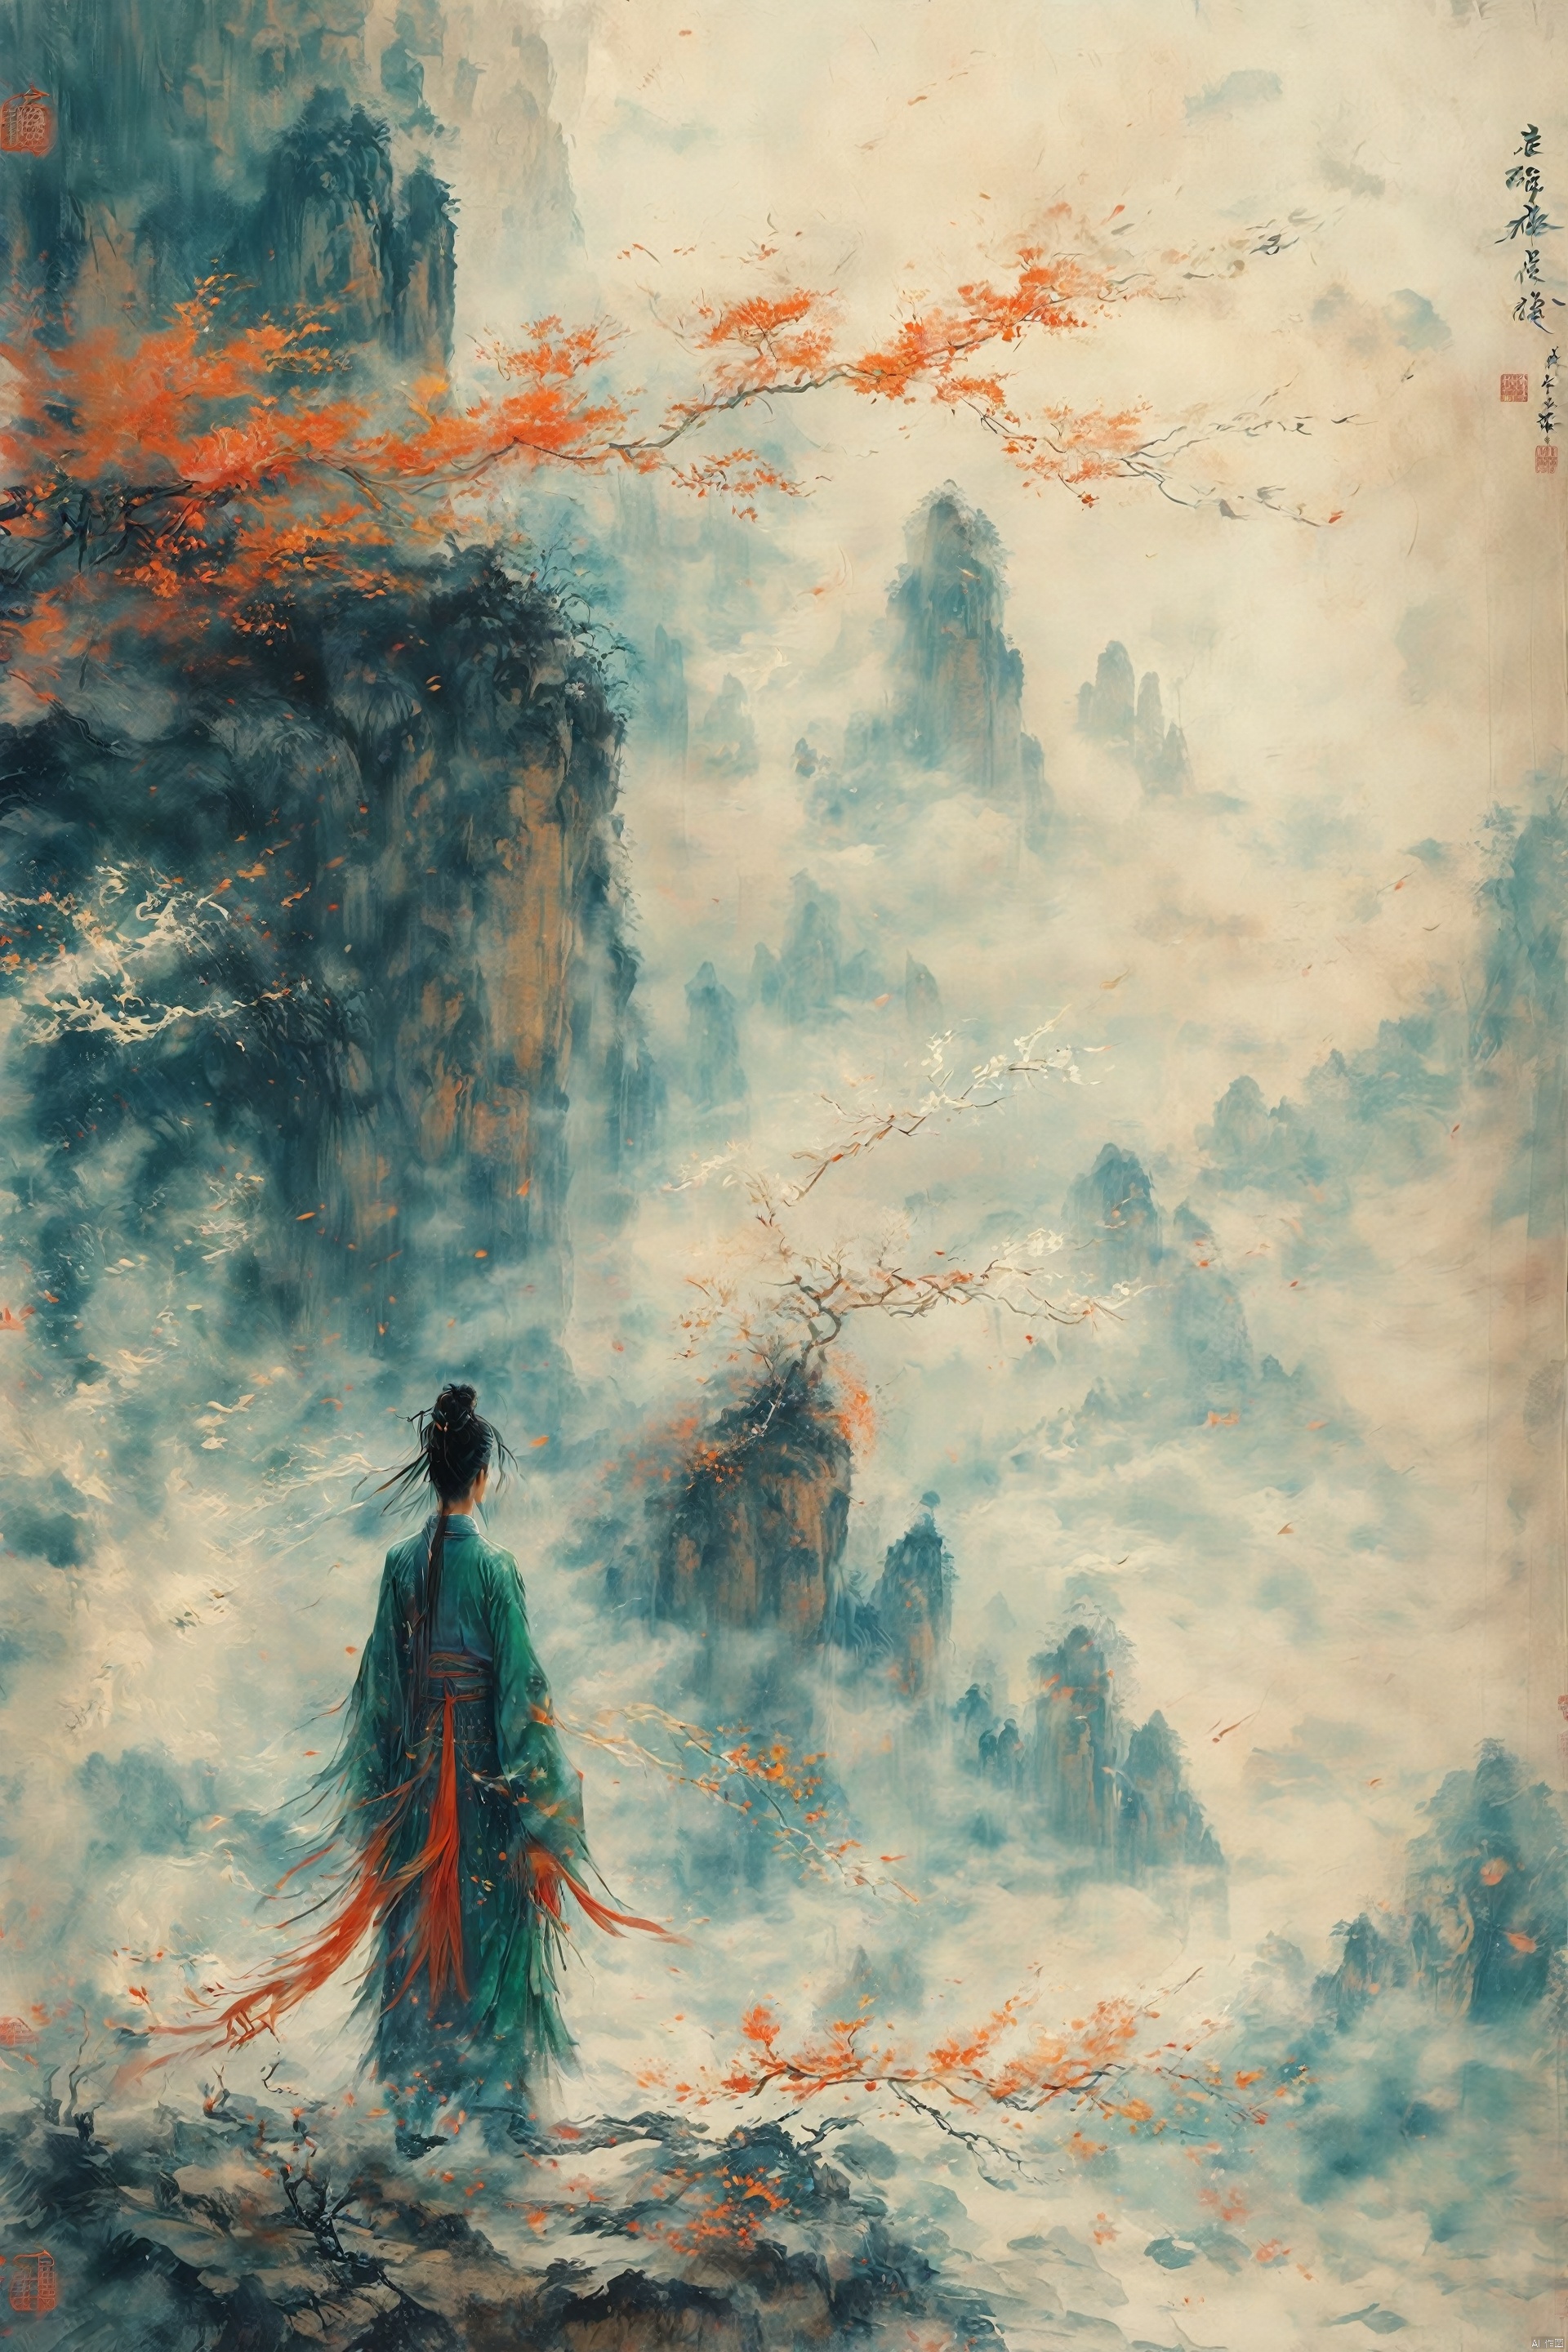  Drone View. An ancient Chinese cultivator walks among many undulating scrolls of calligraphy and paintings. The scrolls are covered with calligraphic characters. He is holding a long sword and wearing a flowing silk Chinese dress with long hair flowing in the wind ::3 3D rendering of a Chinese ink painting scene. Pale gold and emerald green. The scene looks grand in scale from above. Clear light and shadow, subtle starlight floating in the sky, creating a dreamy surreal atmosphere. Ultra-high resolution, the overall composition is very artistic and spatial. Brushstrokes, soft flow, history painting, 3D rendering